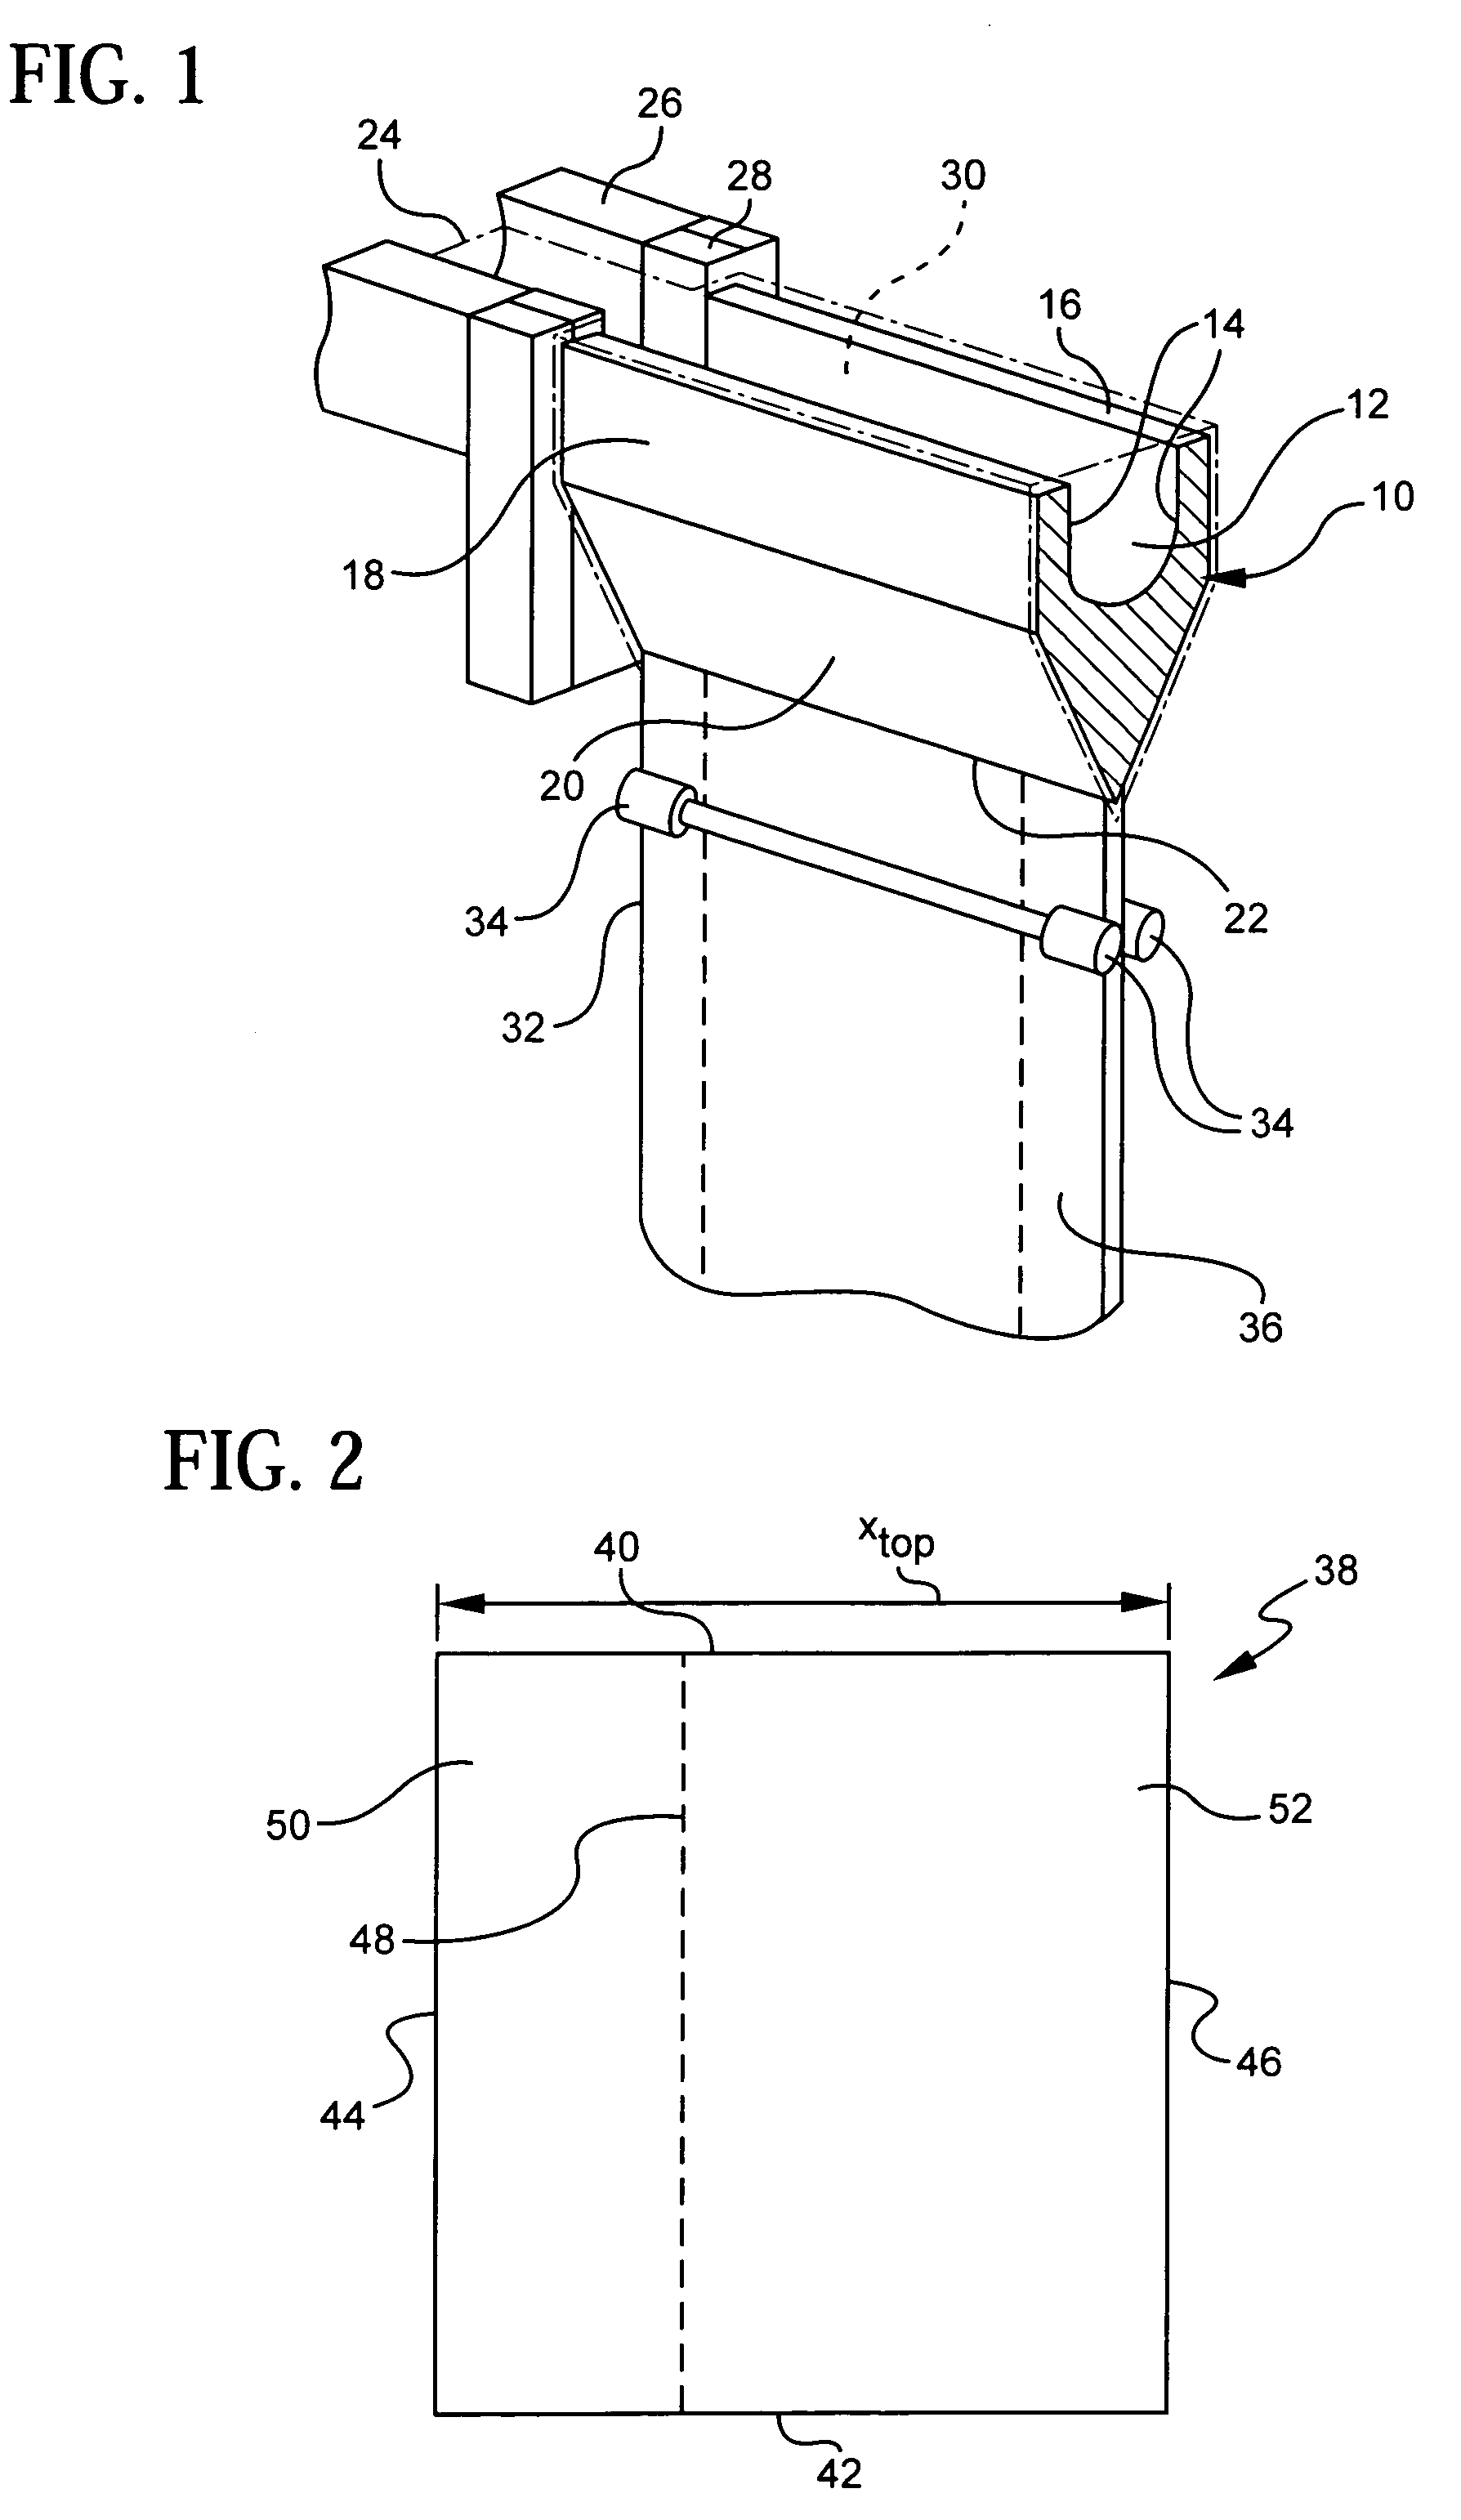 Method of minimizing distortion in a sheet of glass